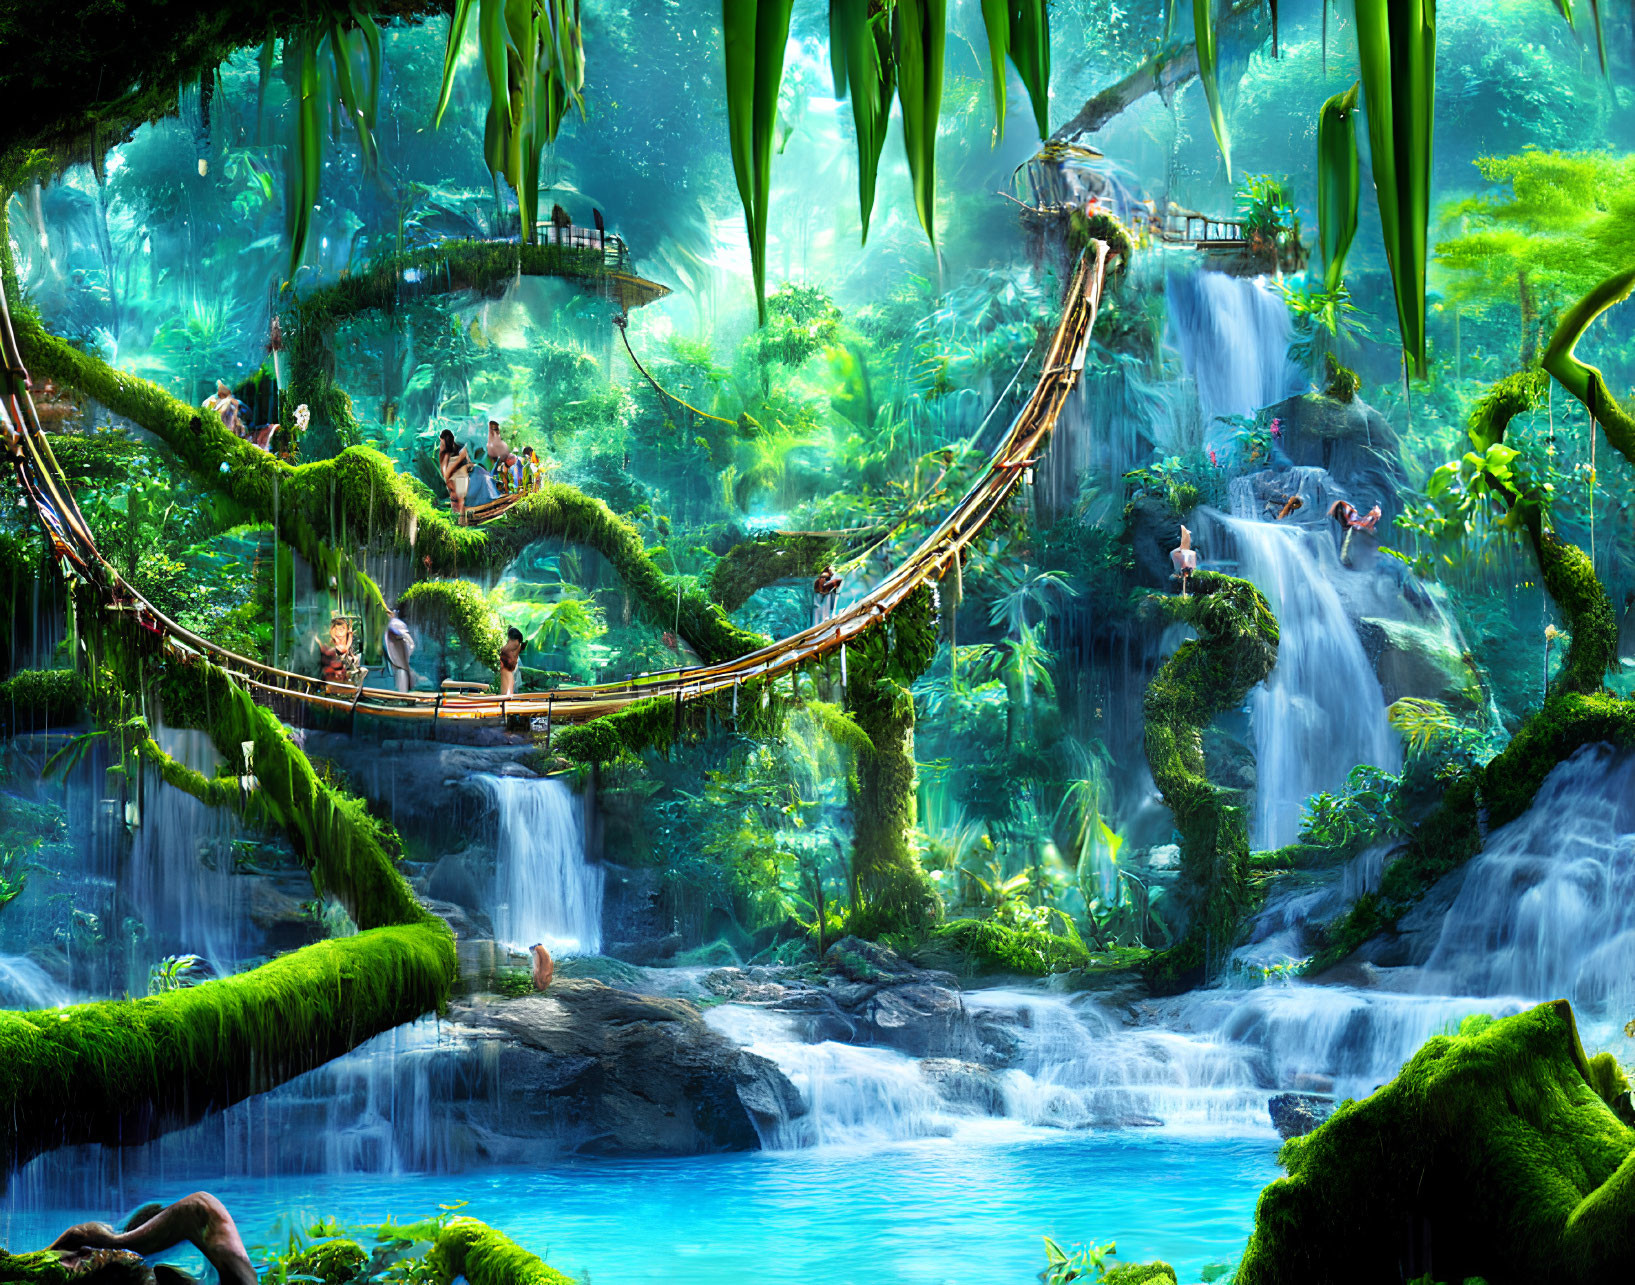 Colorful Jungle Scene with Rope Bridge and Waterfalls